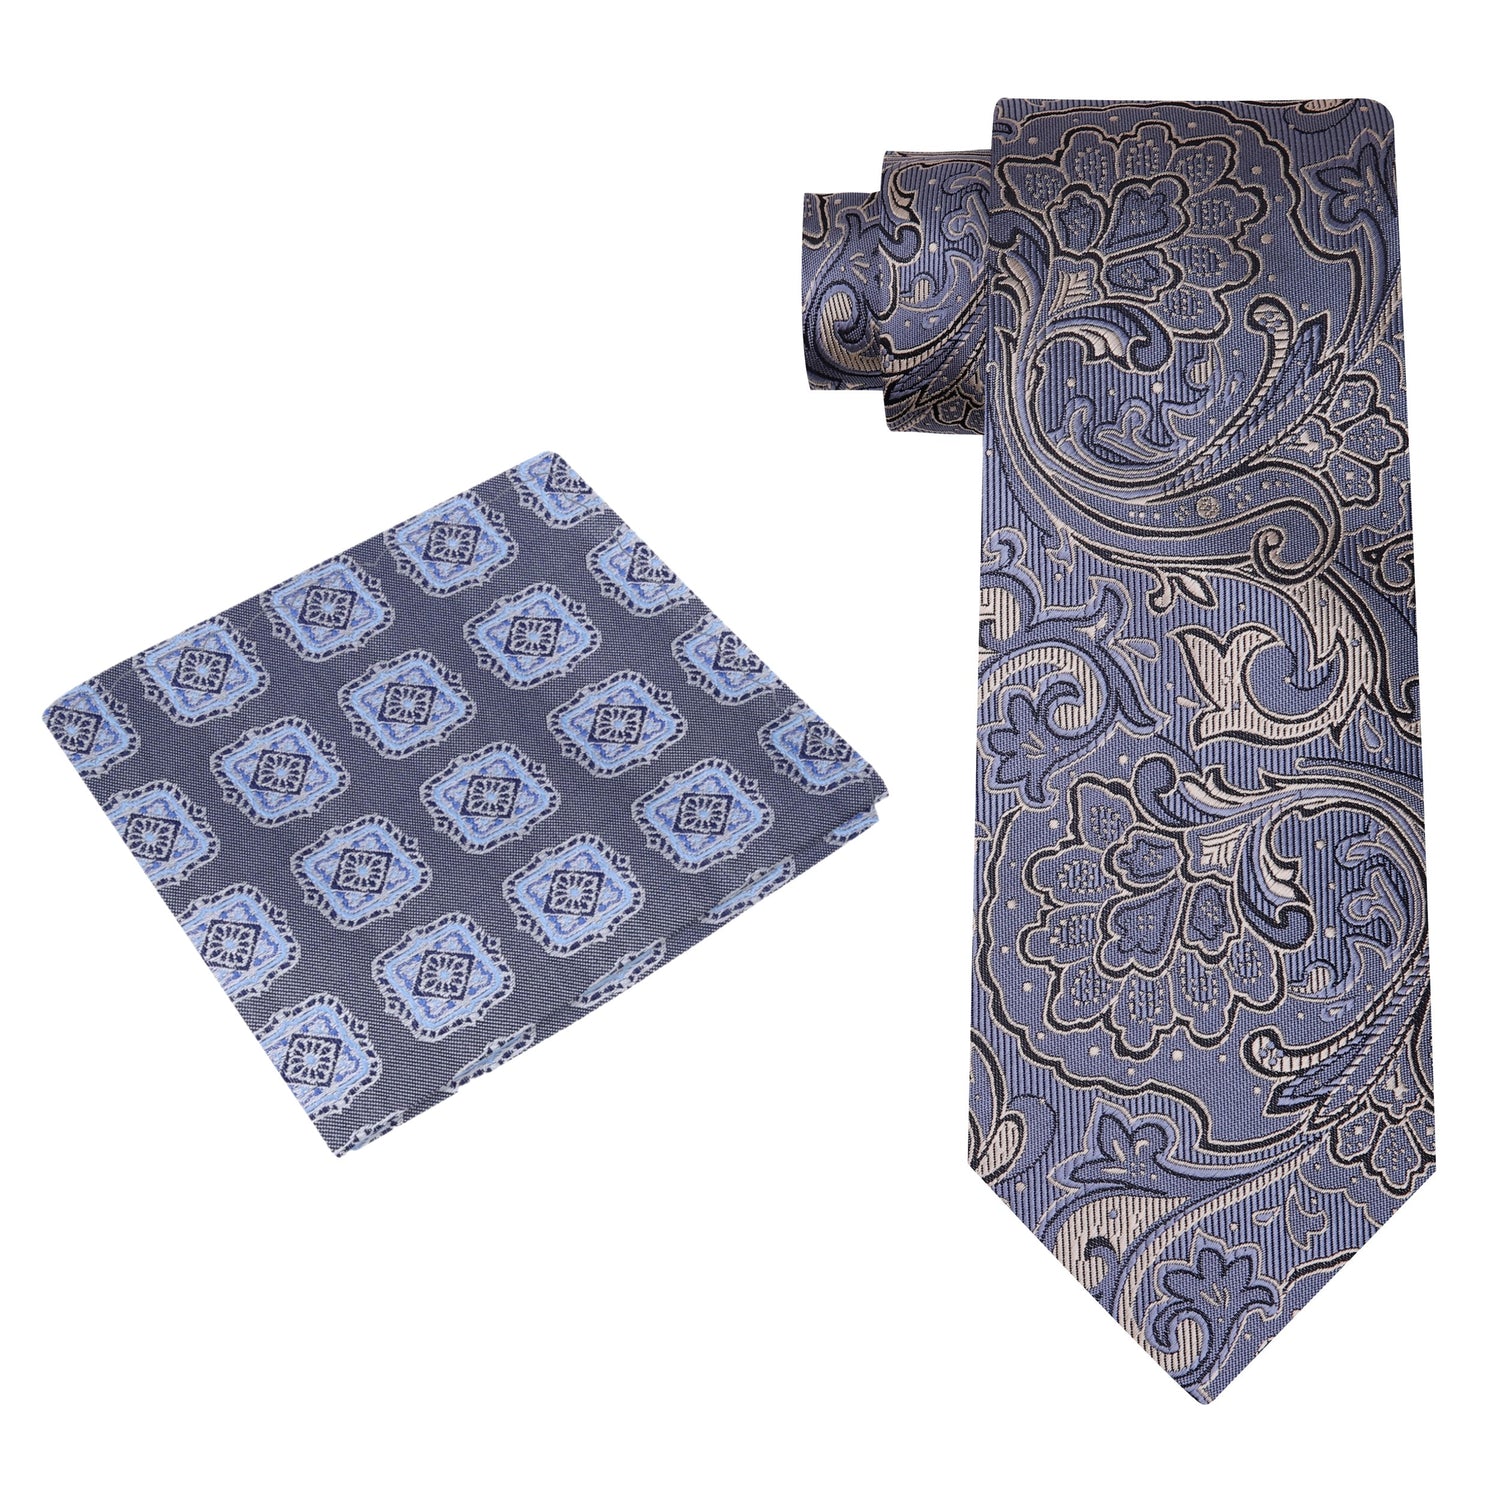 Alt View: A Dark Grey, Grey Abstract Paisley Pattern Silk Necktie, Accenting Pocket Square